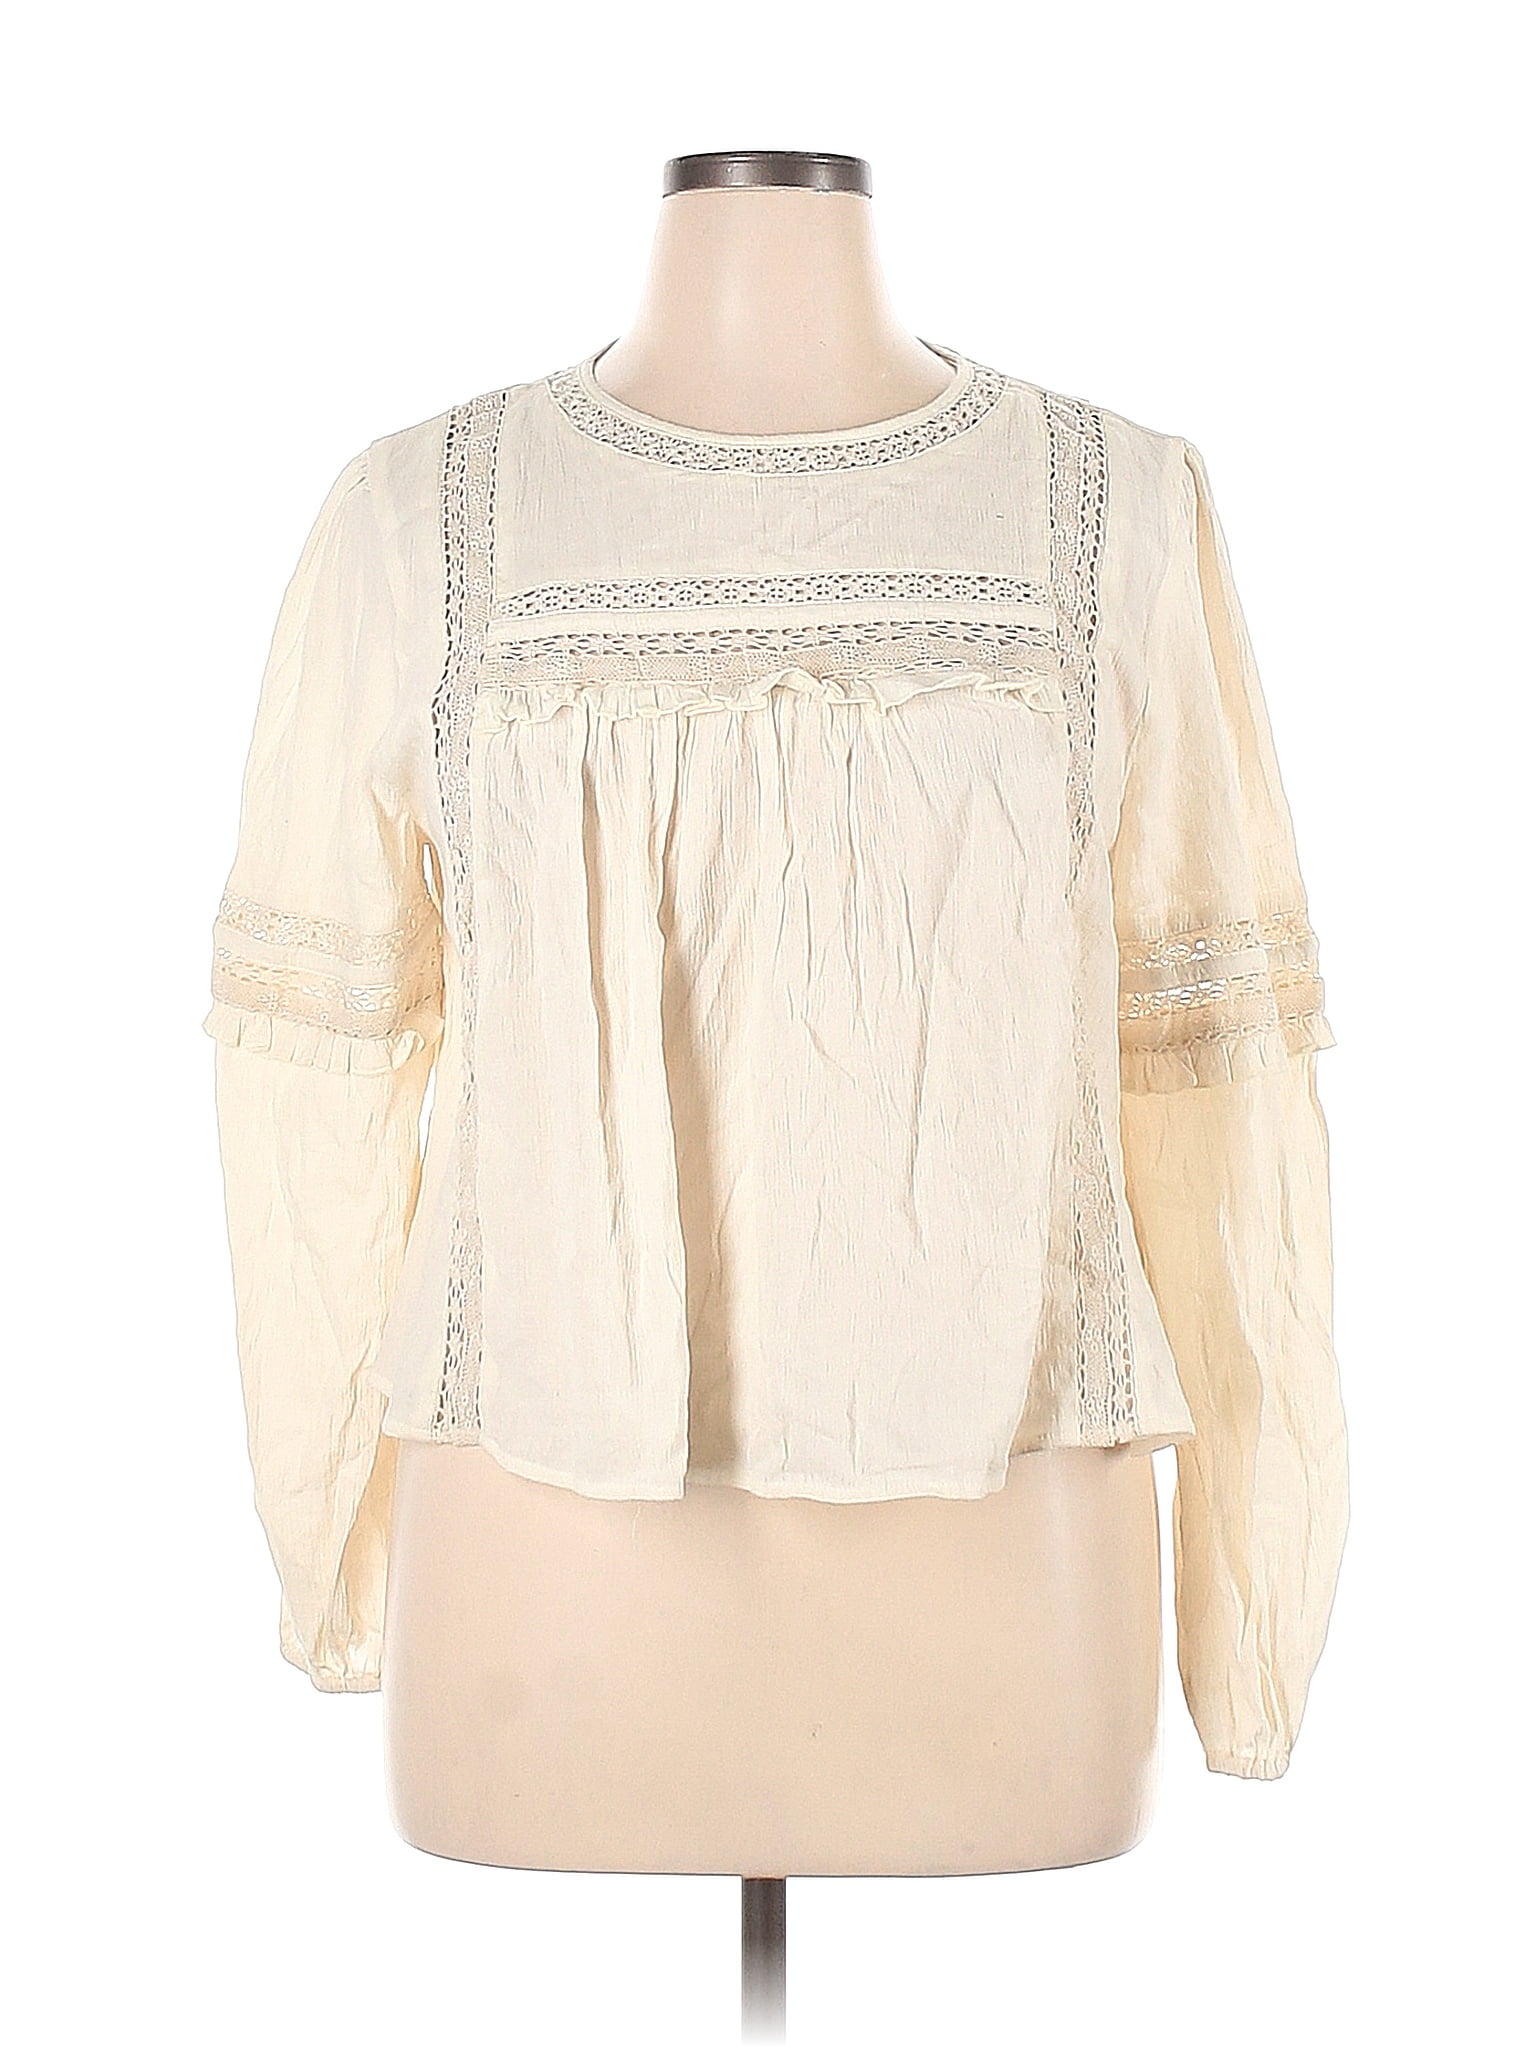 American Eagle Outfitters Ivory Long Sleeve Blouse Size XL - 59% off ...